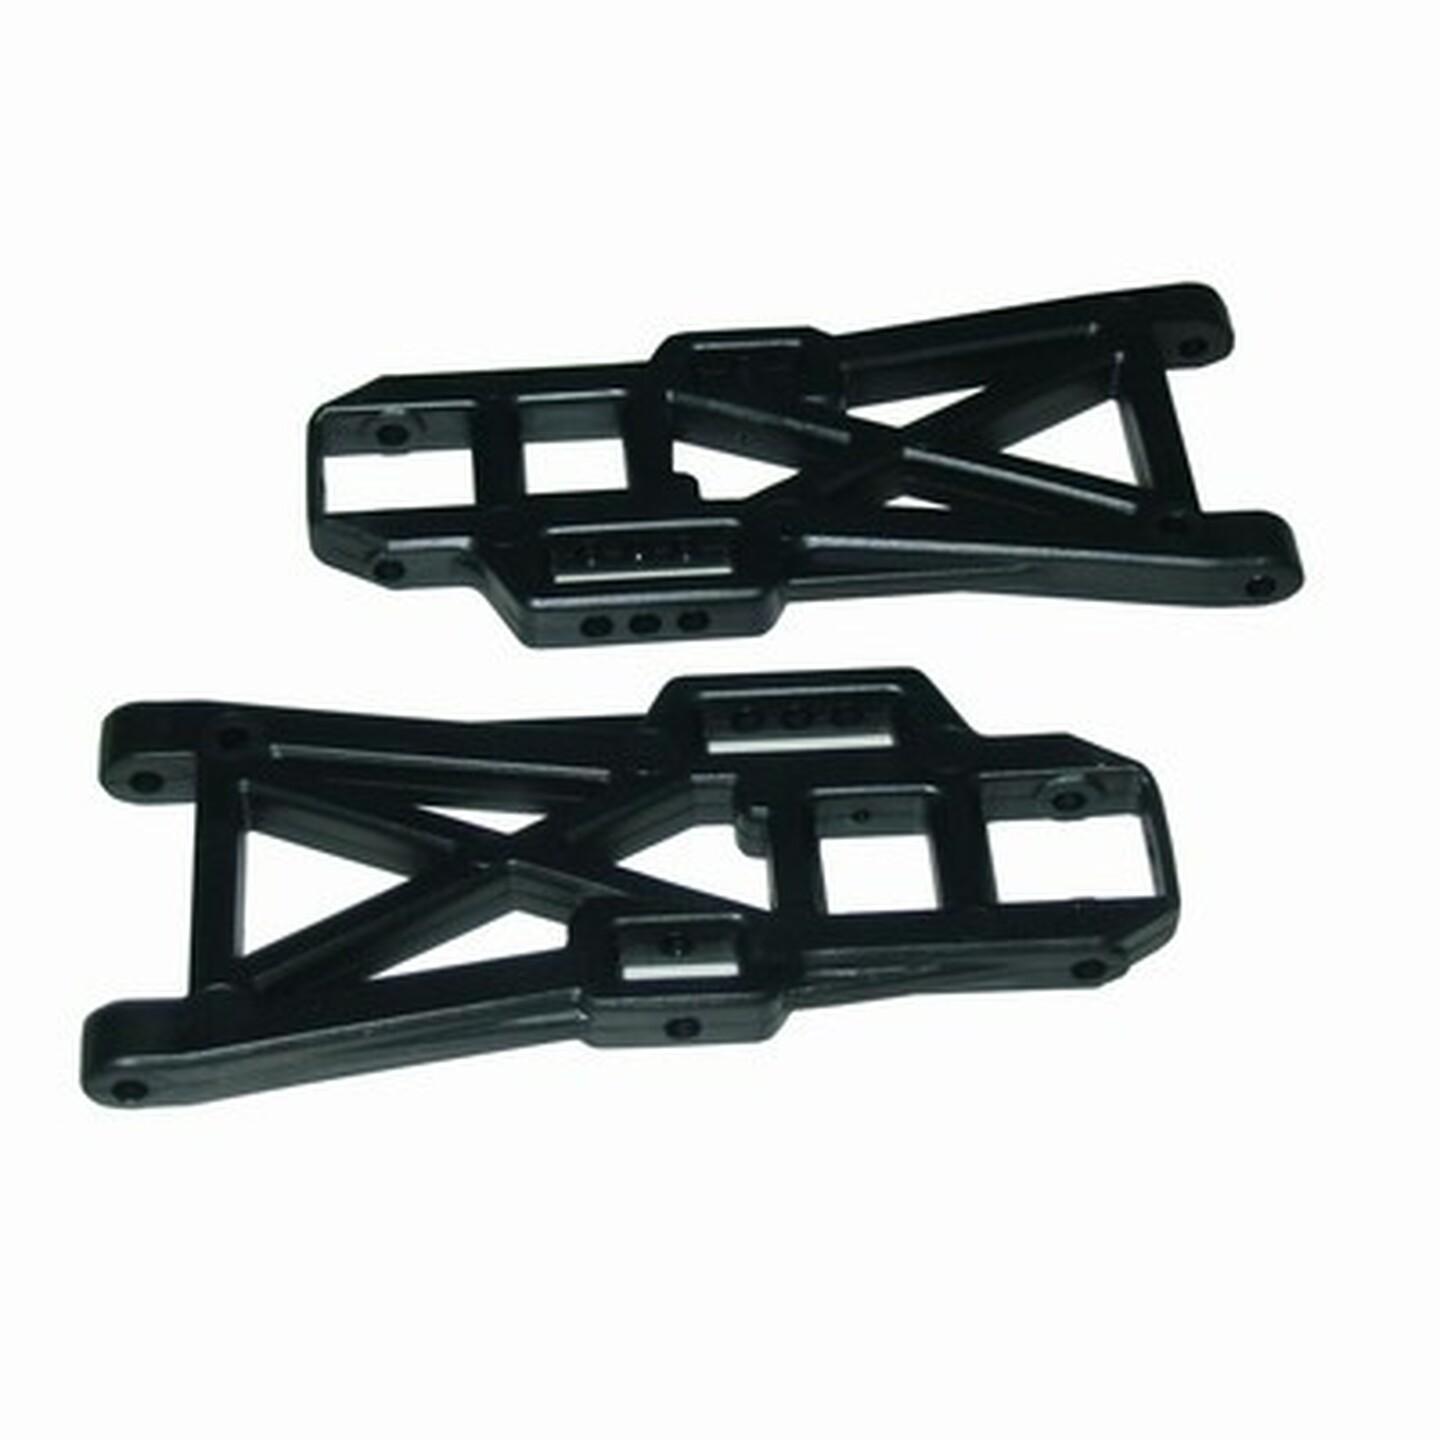 Lower Rear Suspension Arms for GT-3610 Buggy Pair